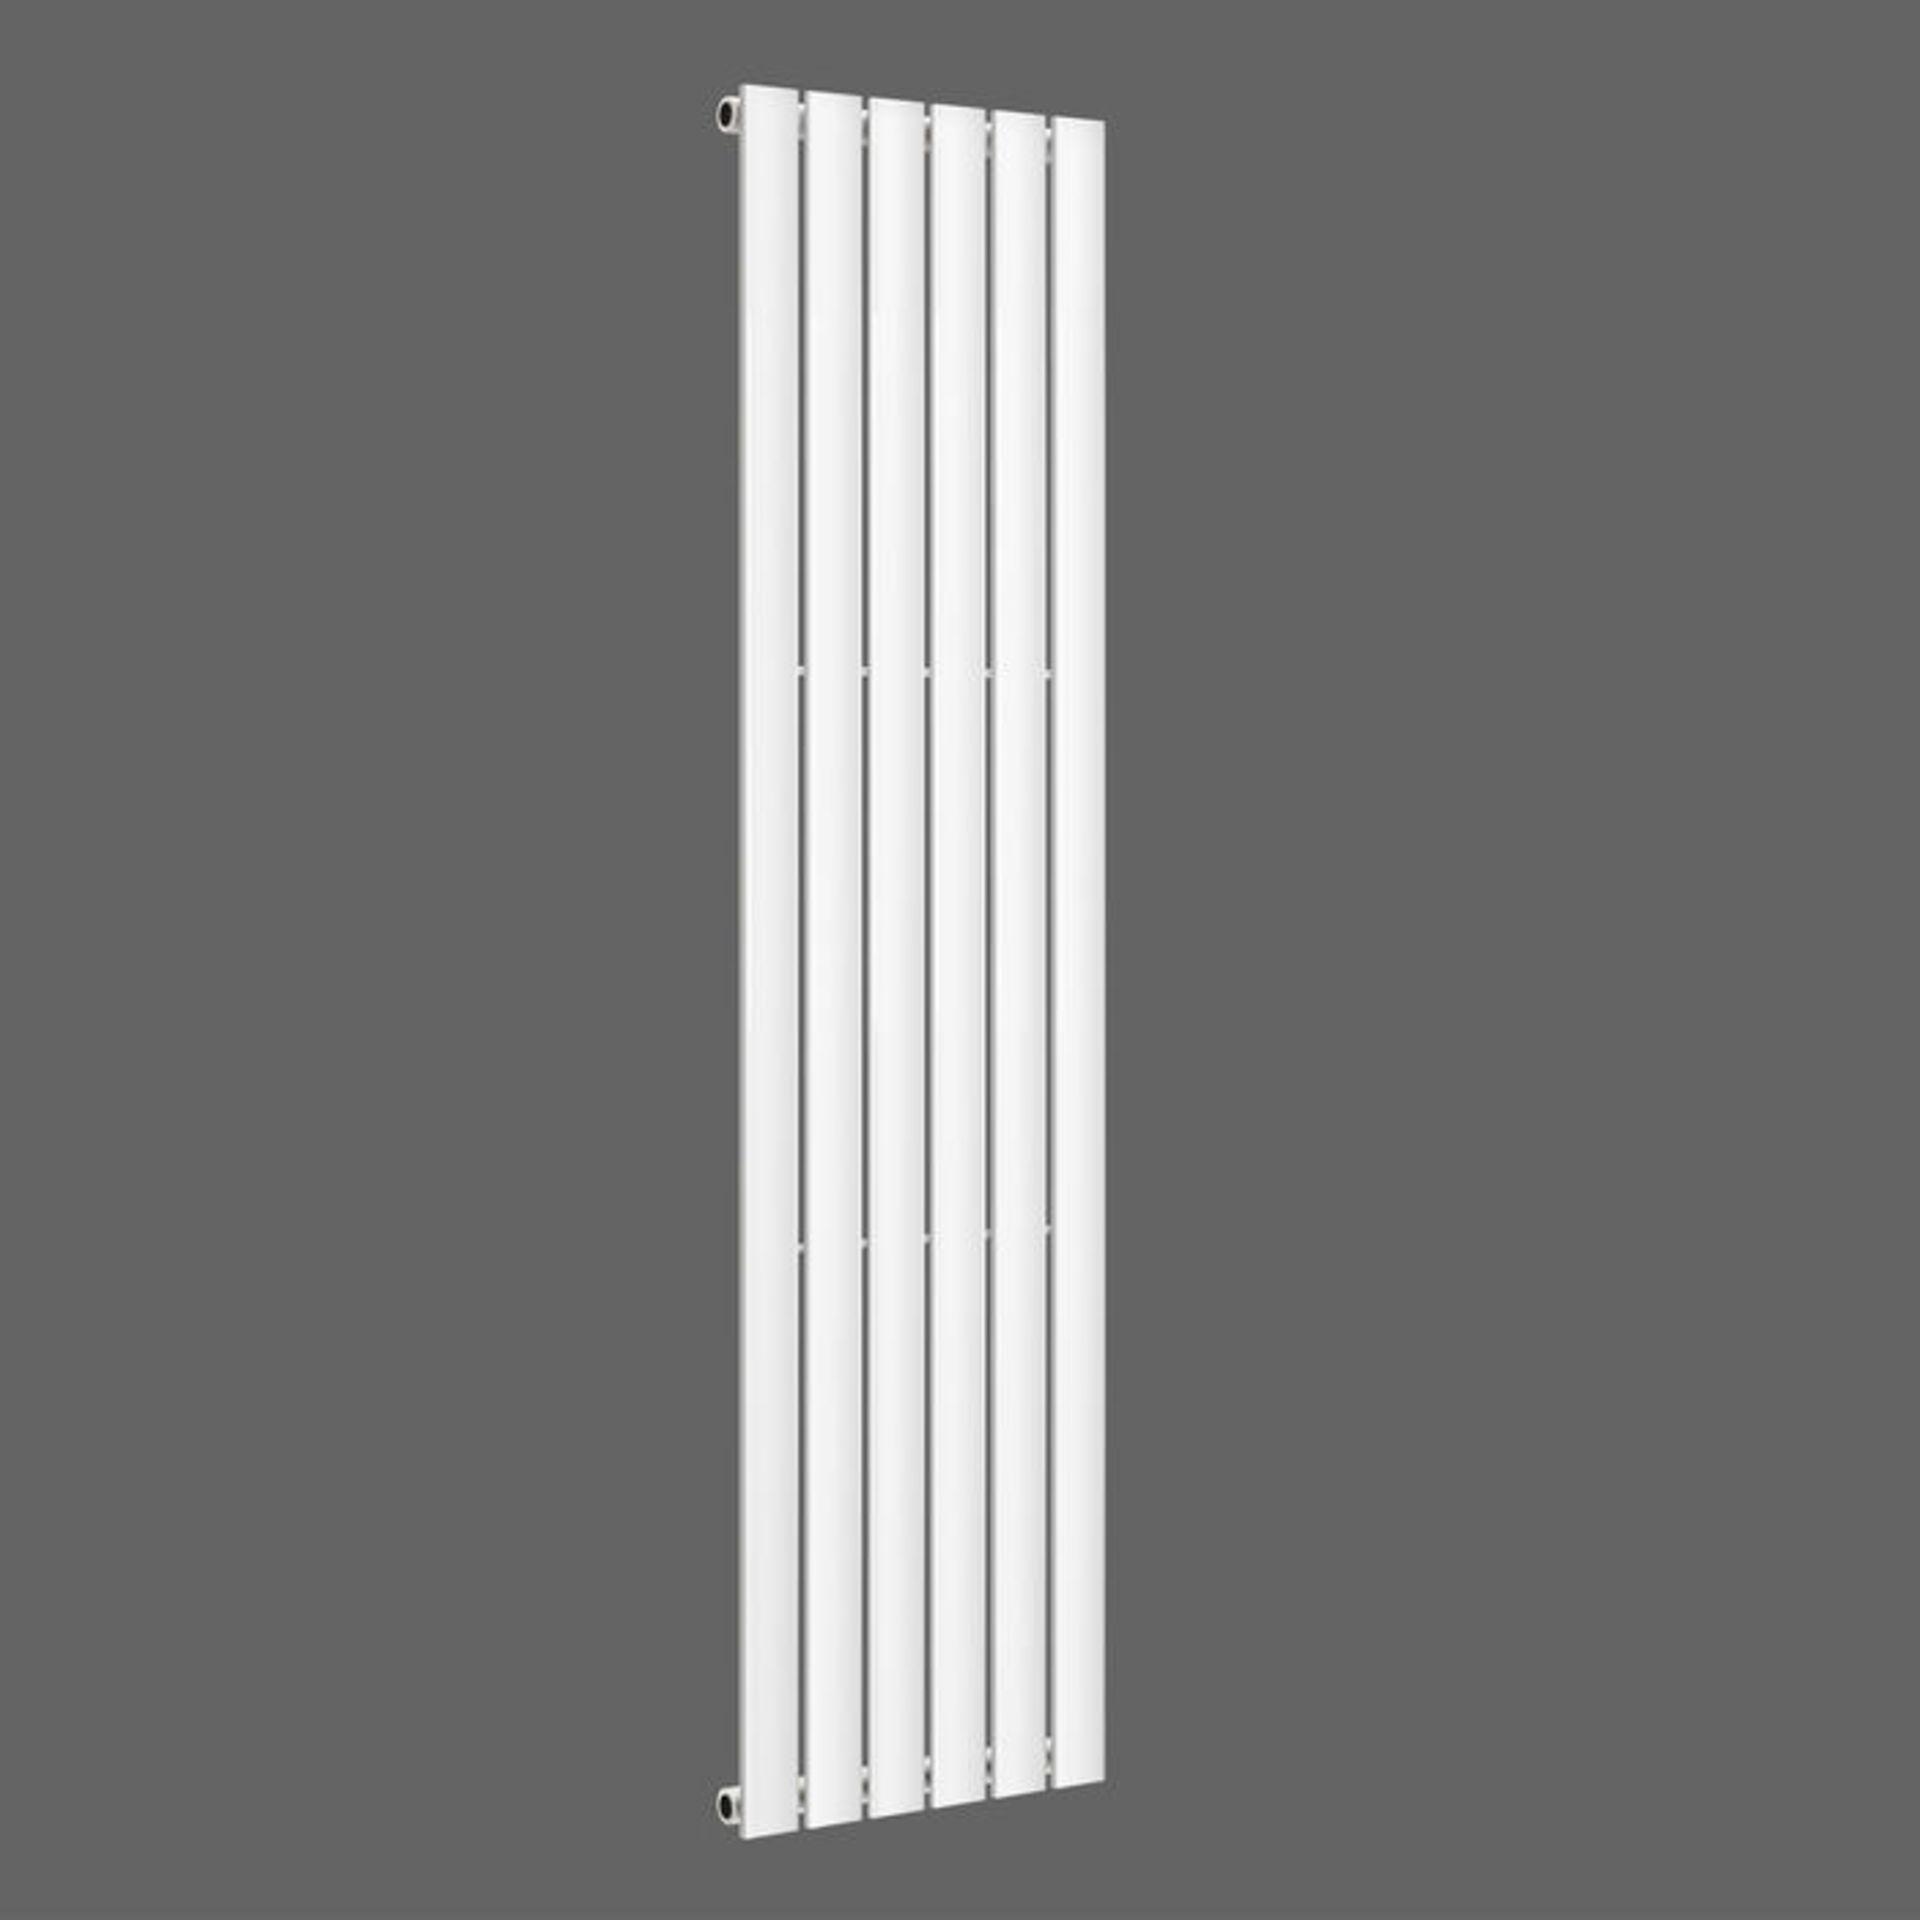 (S53) 1800x452mm Gloss White Single Flat Panel Vertical Radiator RRP £255.98 Made with low carbon - Image 2 of 2